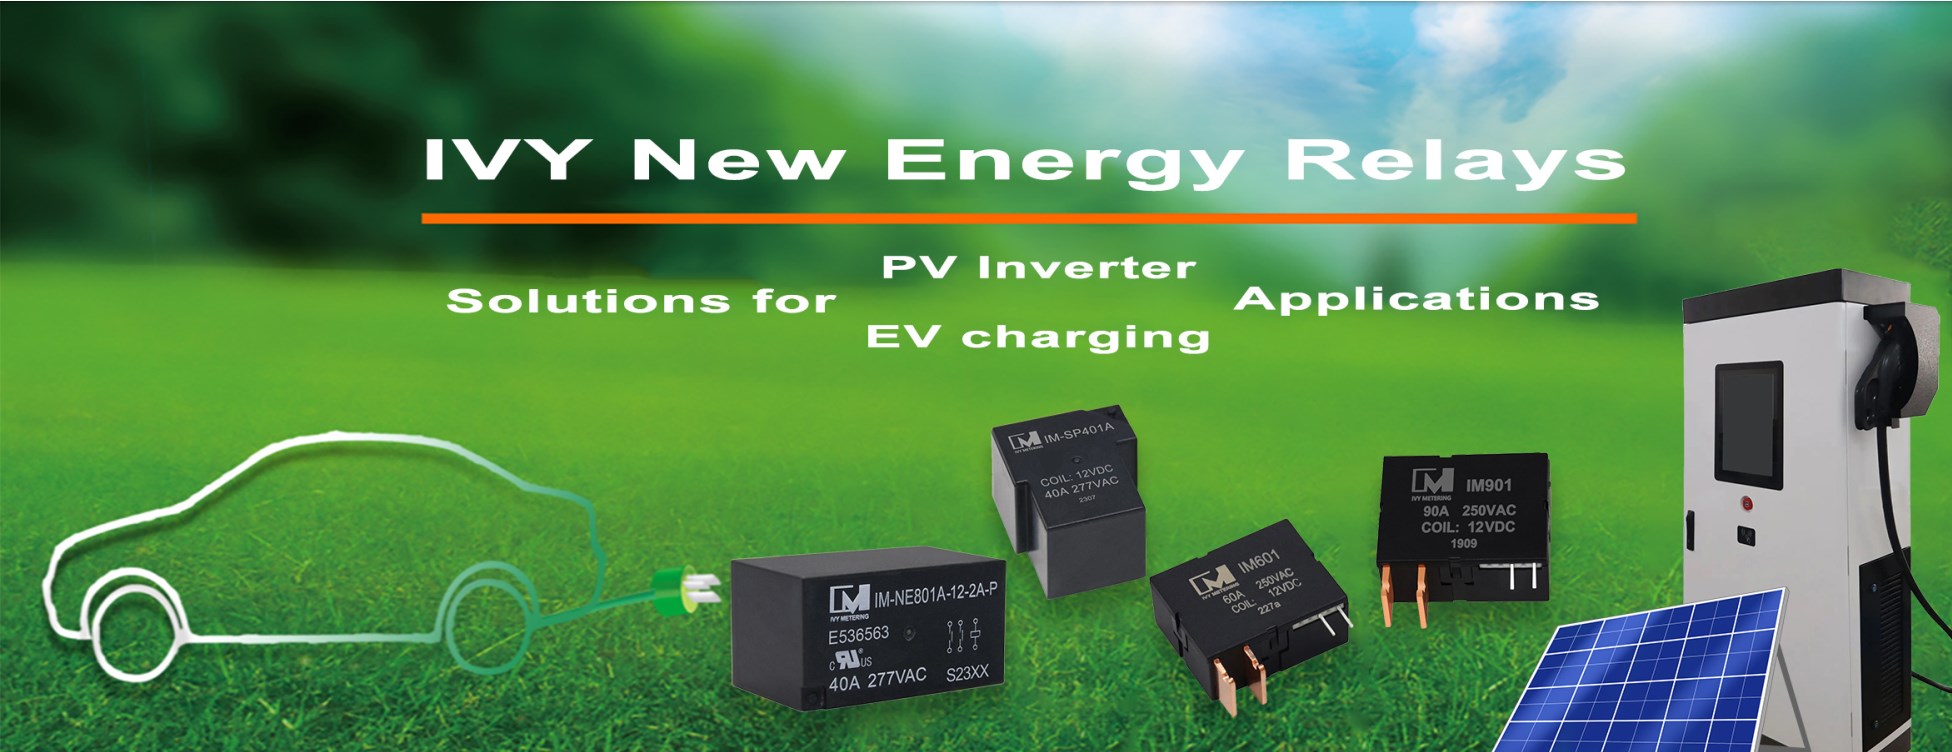 ev charger relay,32a 40a relay,2 pole relay,solar relay,dpst relay.jpg